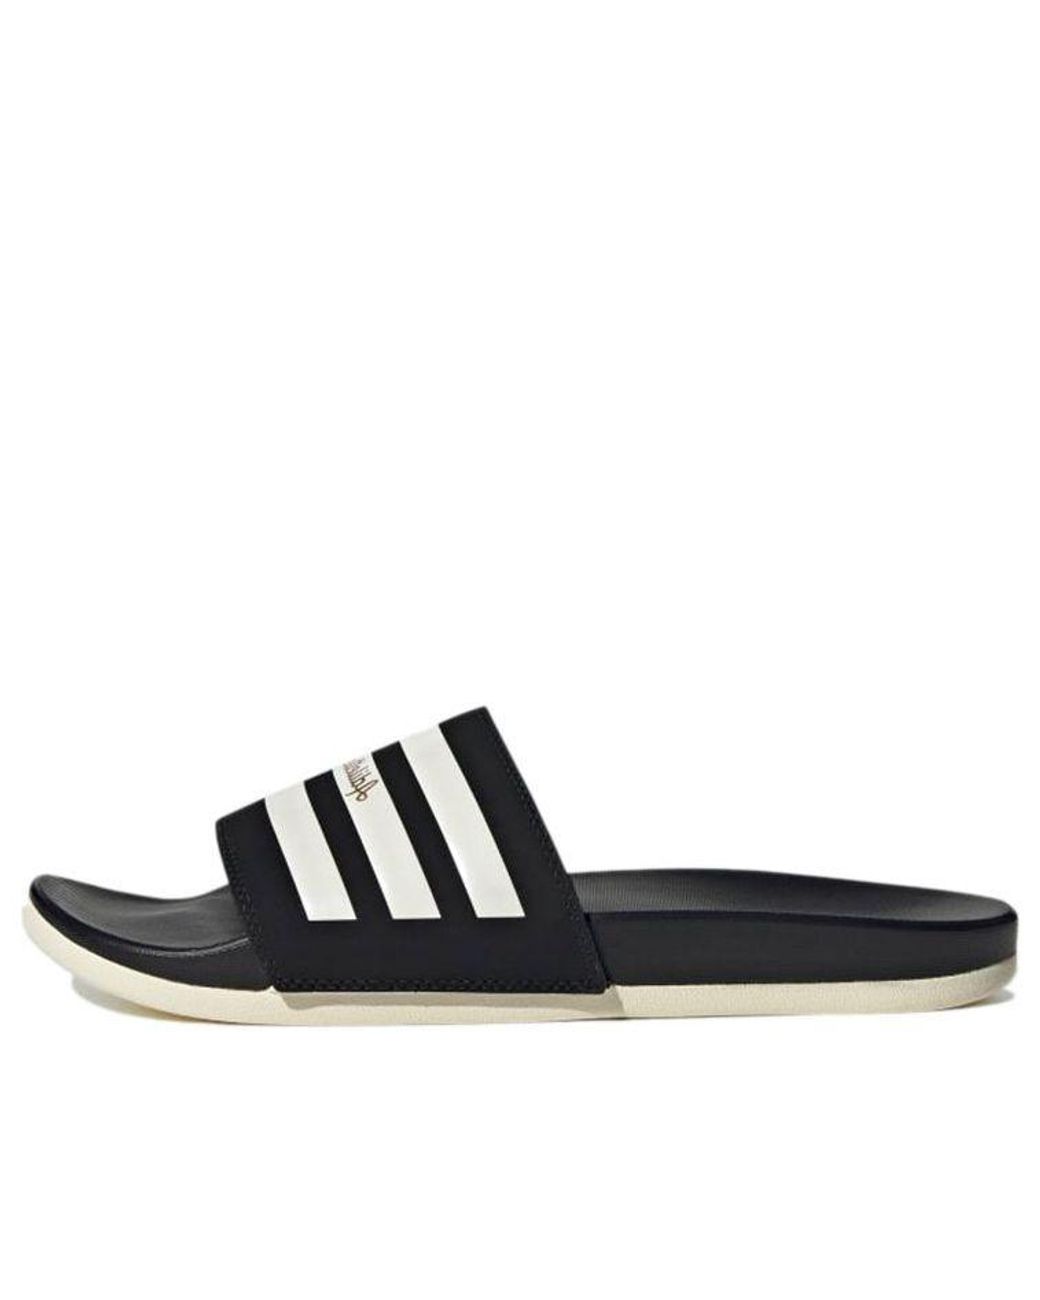 adidas Adilette Comfort Casual Sports Slippers Black White | Lyst